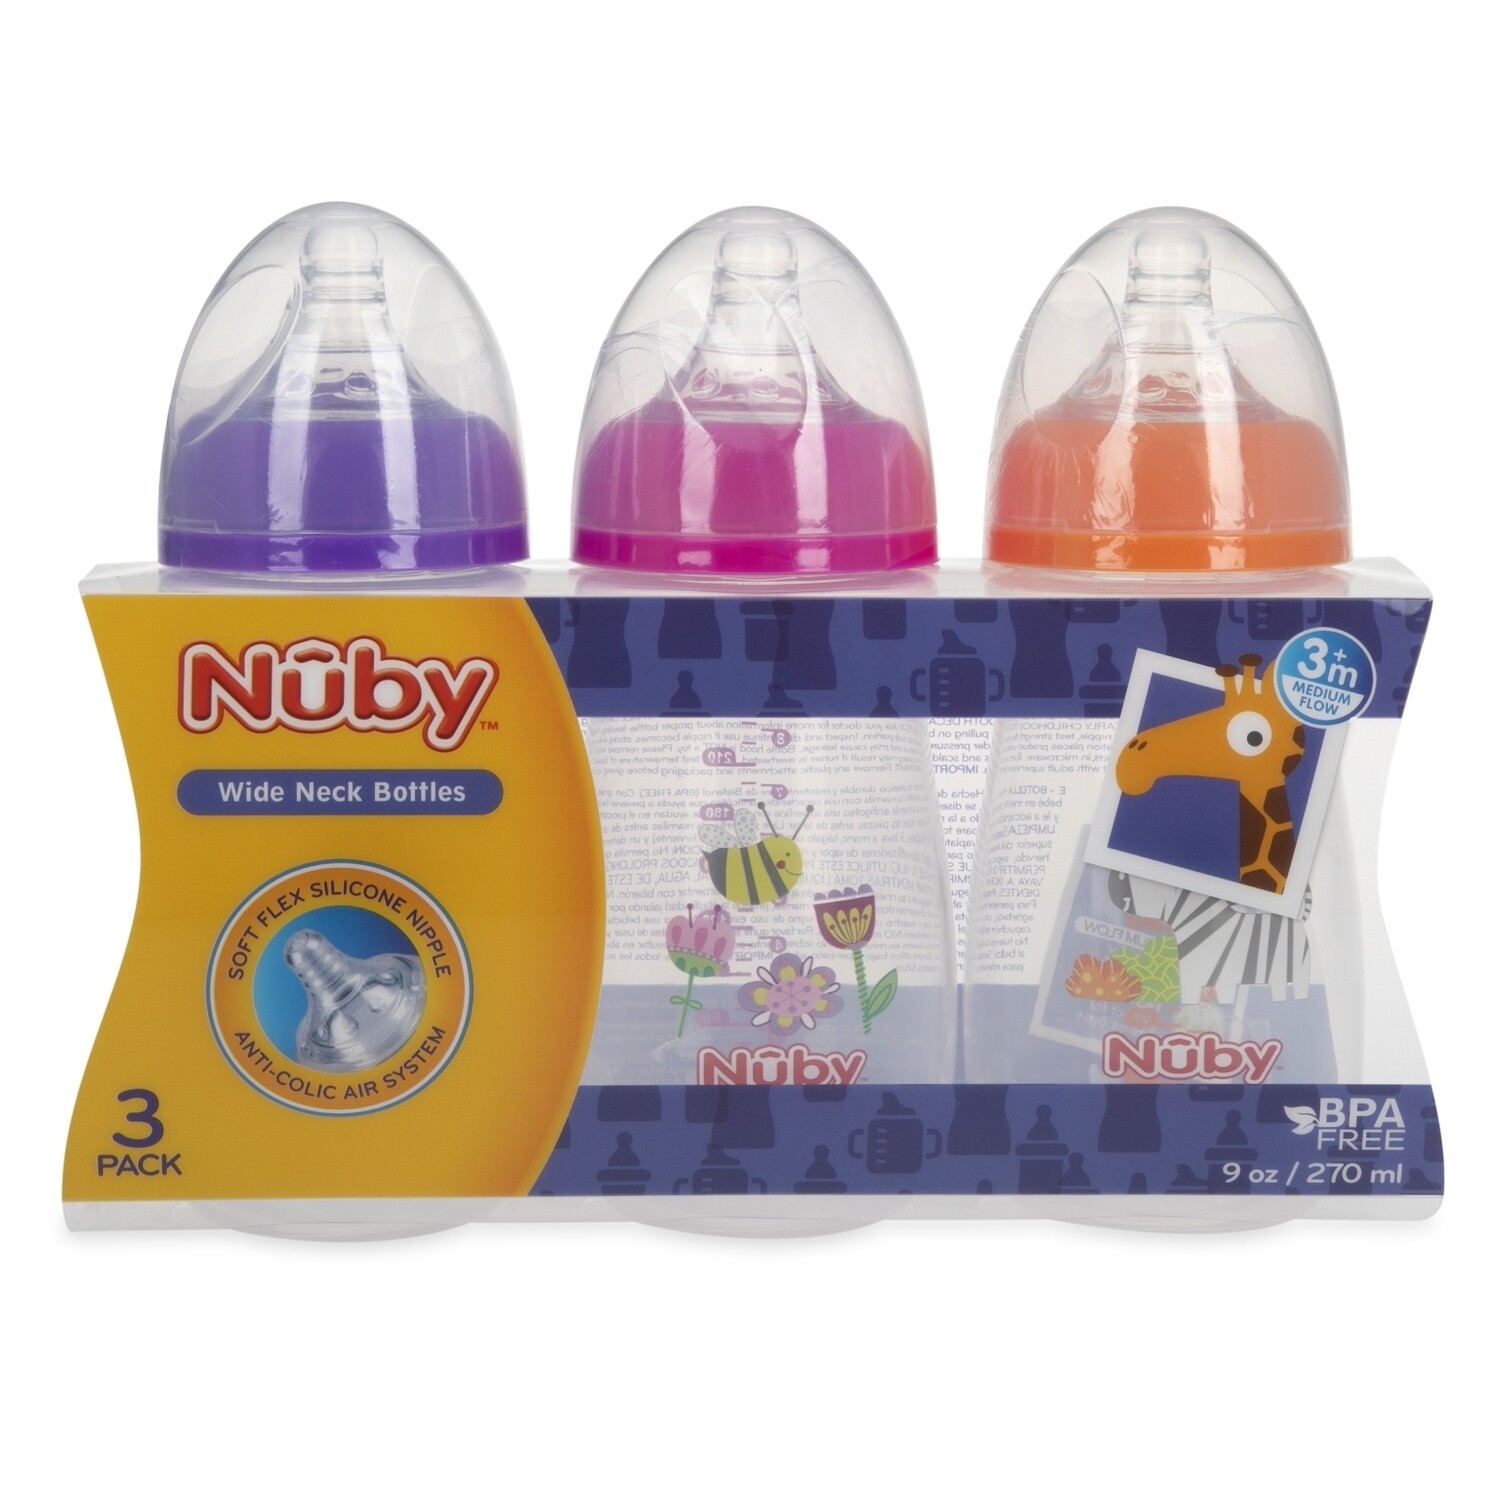 . Case of [24] Nuby Wide Neck Bottles - 3 Count, Anti-Colic Air System, Medium ffow .